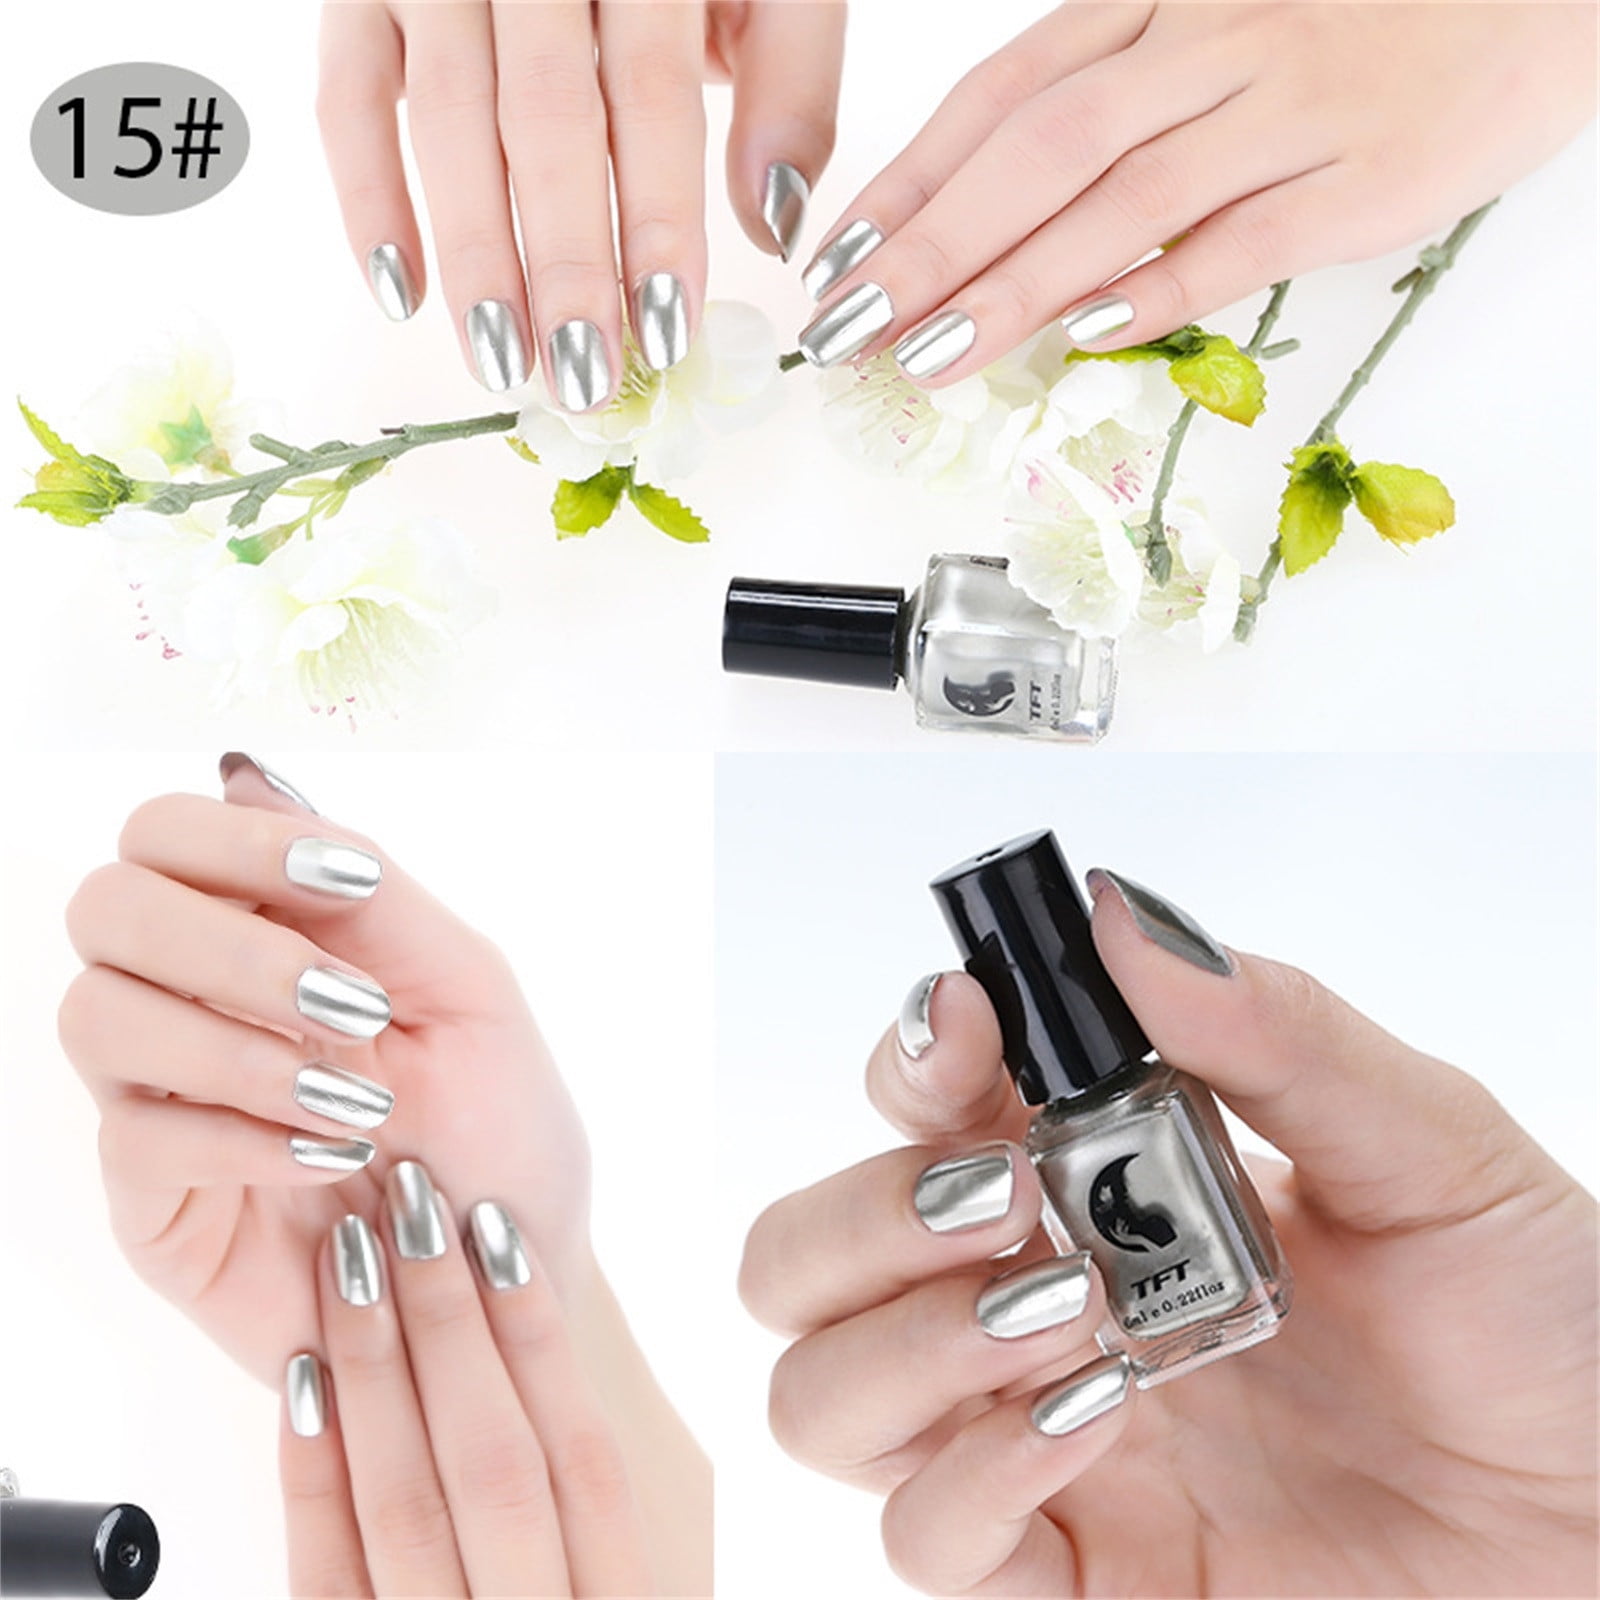 WMYBD Gifts for Women,TFT Metallic Stainless Steel Mirror Silver Nail Polish  17 Colors 6ML 